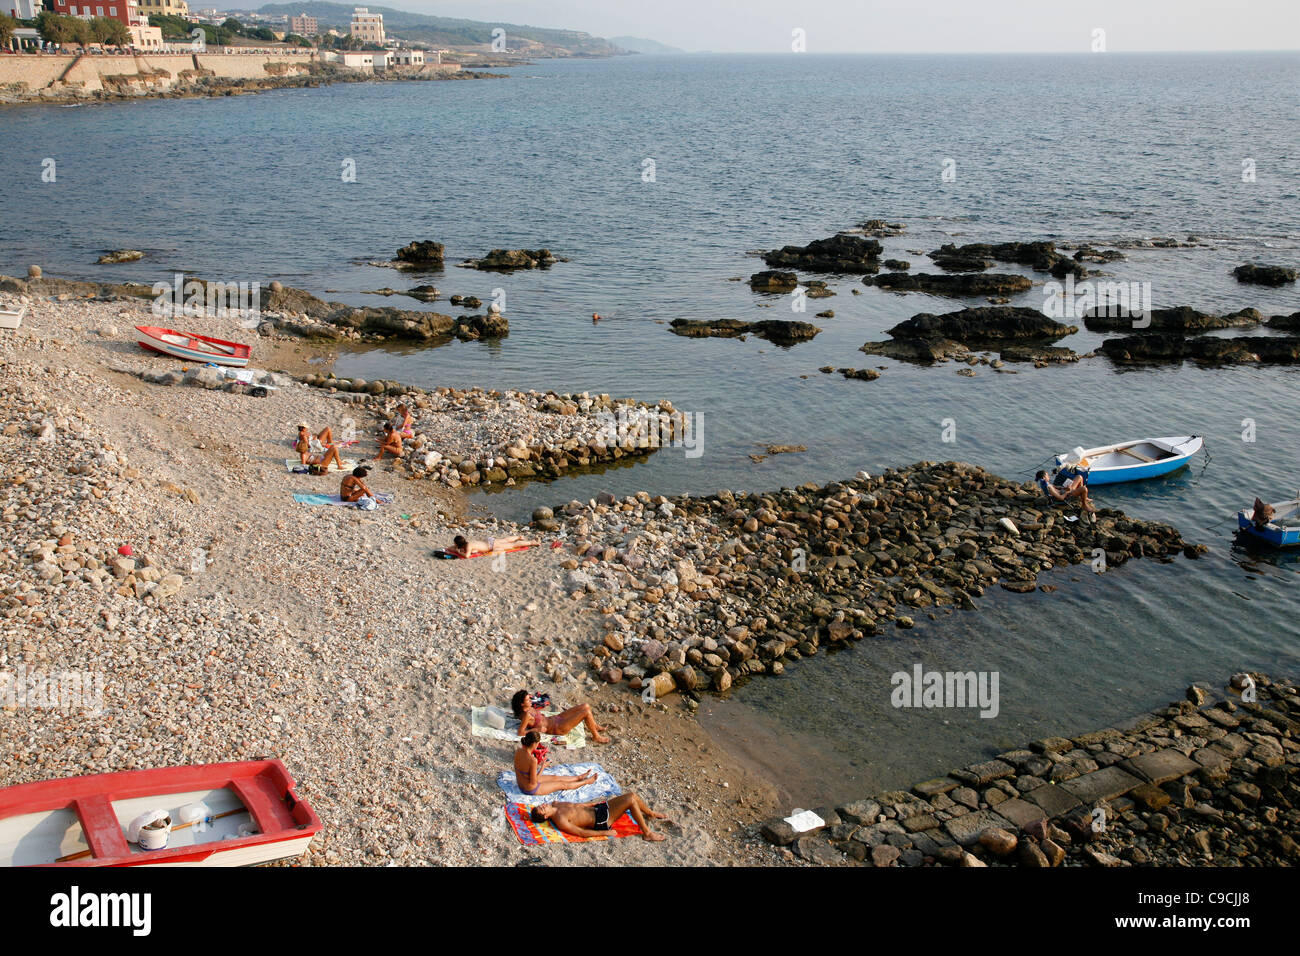 People on the beach just by the city walls, Alghero, Sardinia, Italy. Stock Photo